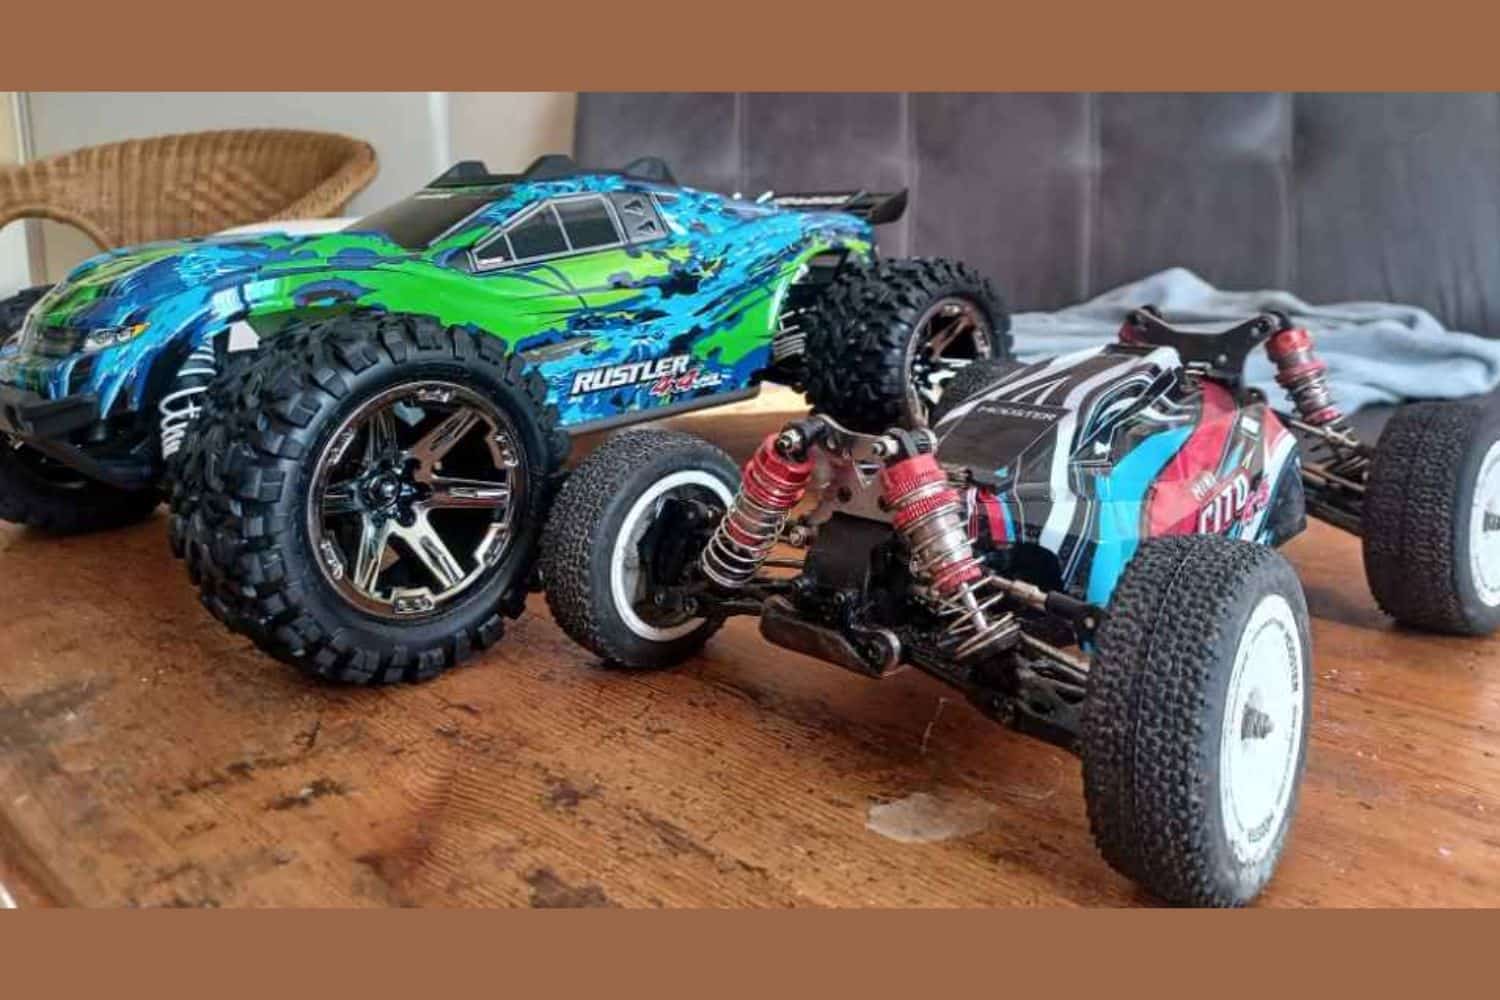 Understanding Your Battery Options for Remote Control Cars